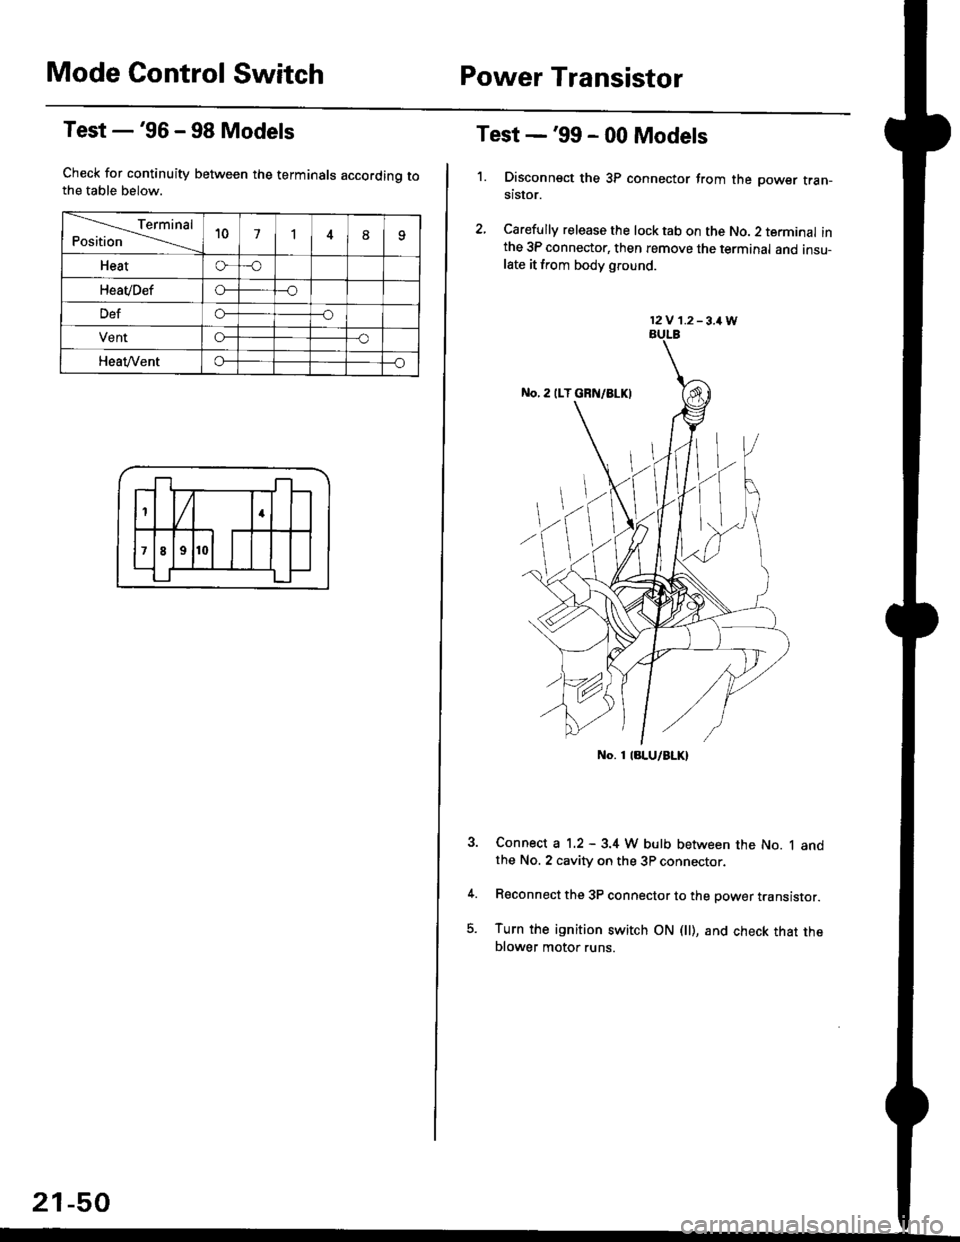 HONDA CIVIC 1996 6.G Workshop Manual Mode Control SwitchPower Transistor
Test -96 - 98 Models
Check for continuity between the terminals accordinq tothe table below.
Terminal
Positiont071
Heato-o
HeaVDefo---o
Defo--o
VentG-o
HeaVVento-